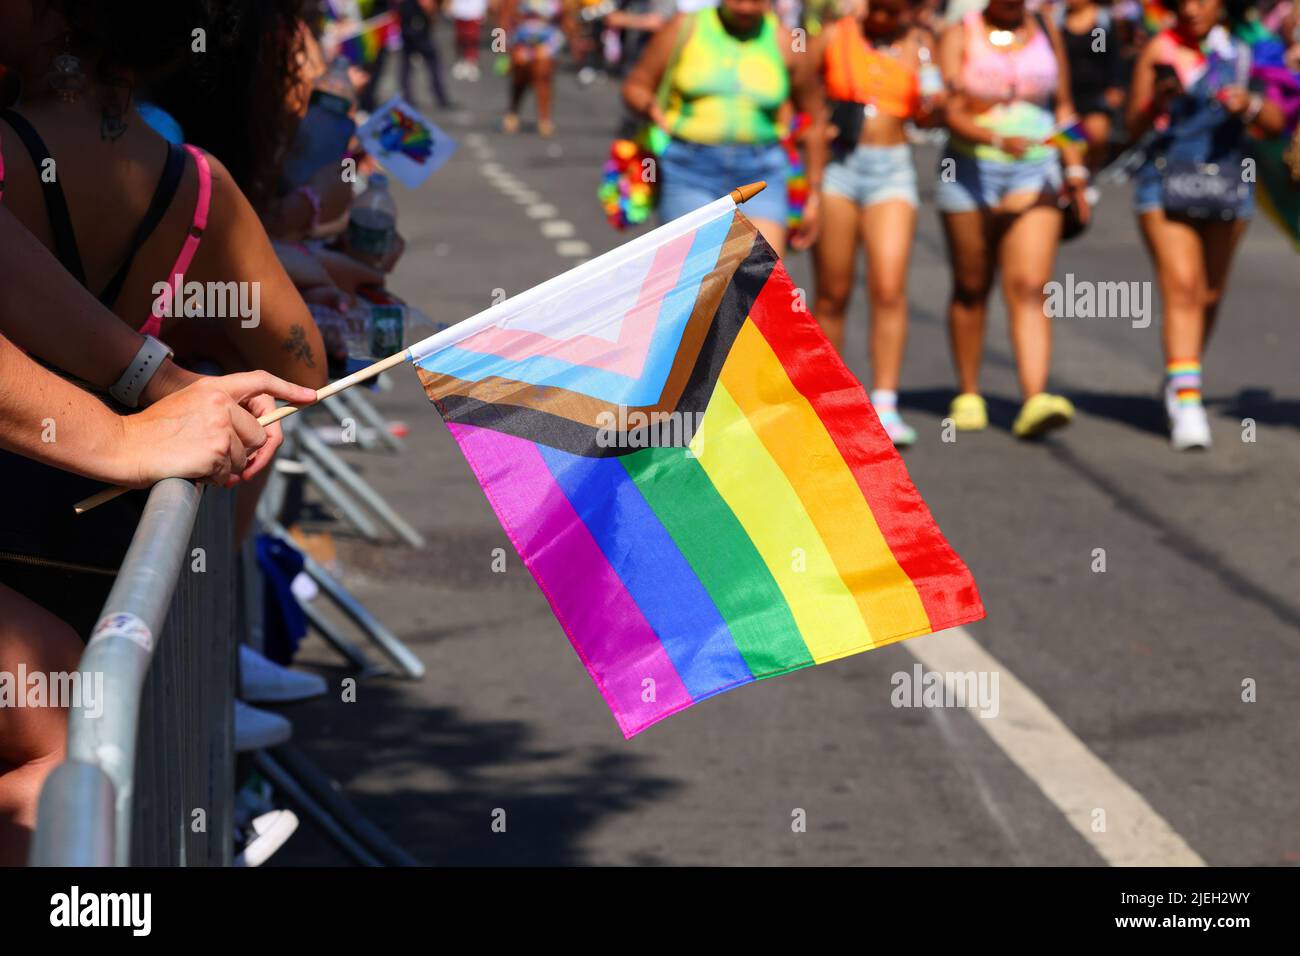 New York, June 26, 2022. A person holds a Progress Pride Flag at NYC Pride. The flag includes black and brown stripes representing marginalized LGBTQ+ Stock Photo